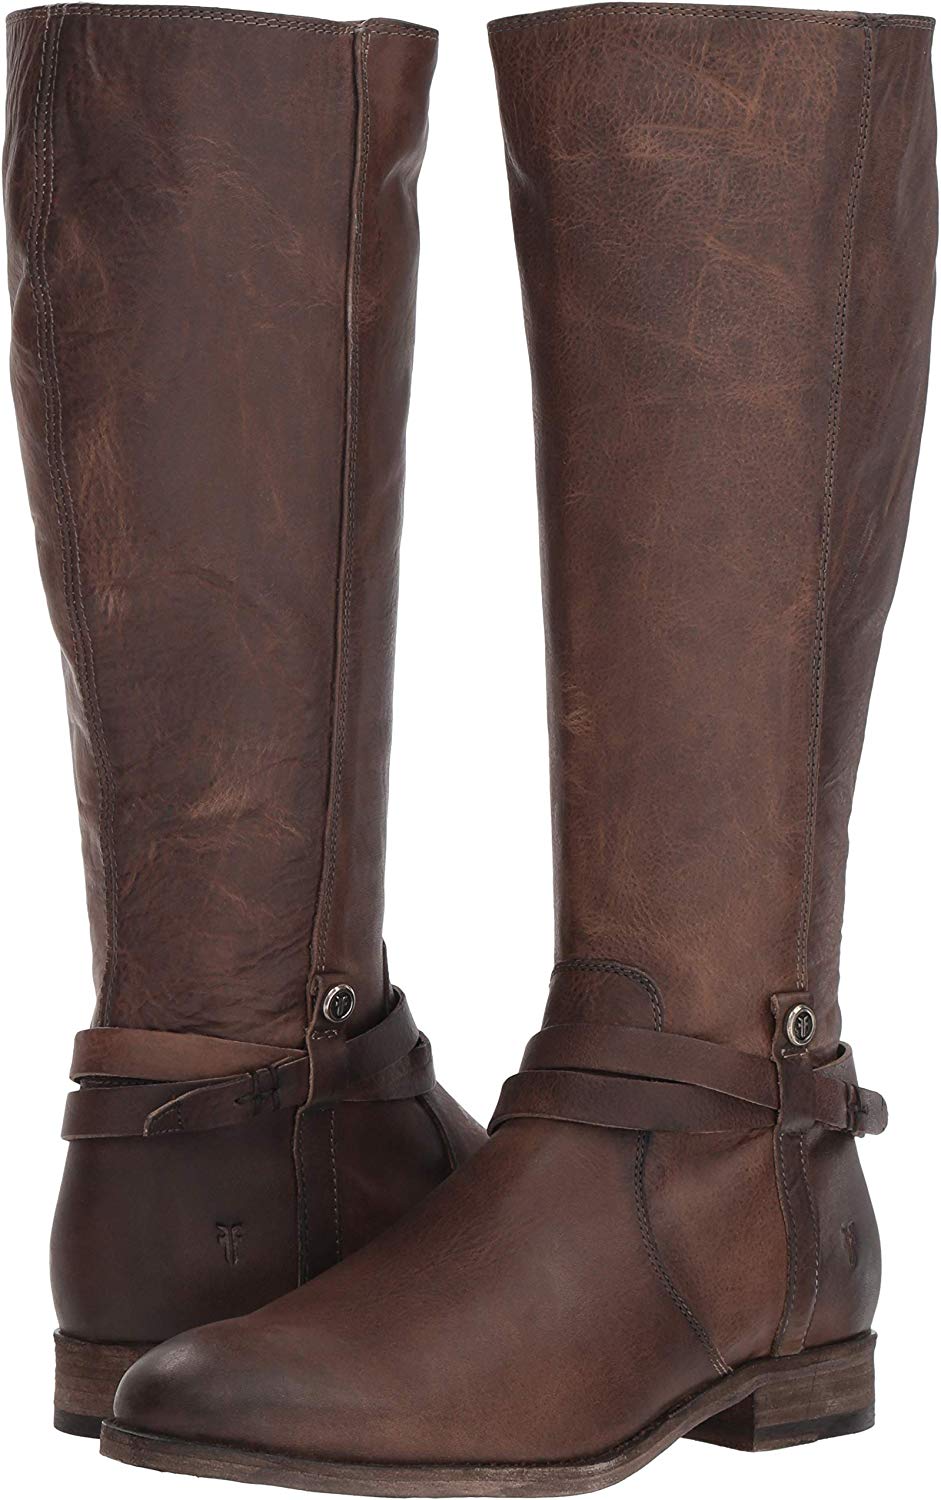 FRYE Women's Melissa Belted Tall Knee High Boot, Stone, Size 7.5 cmUo ...